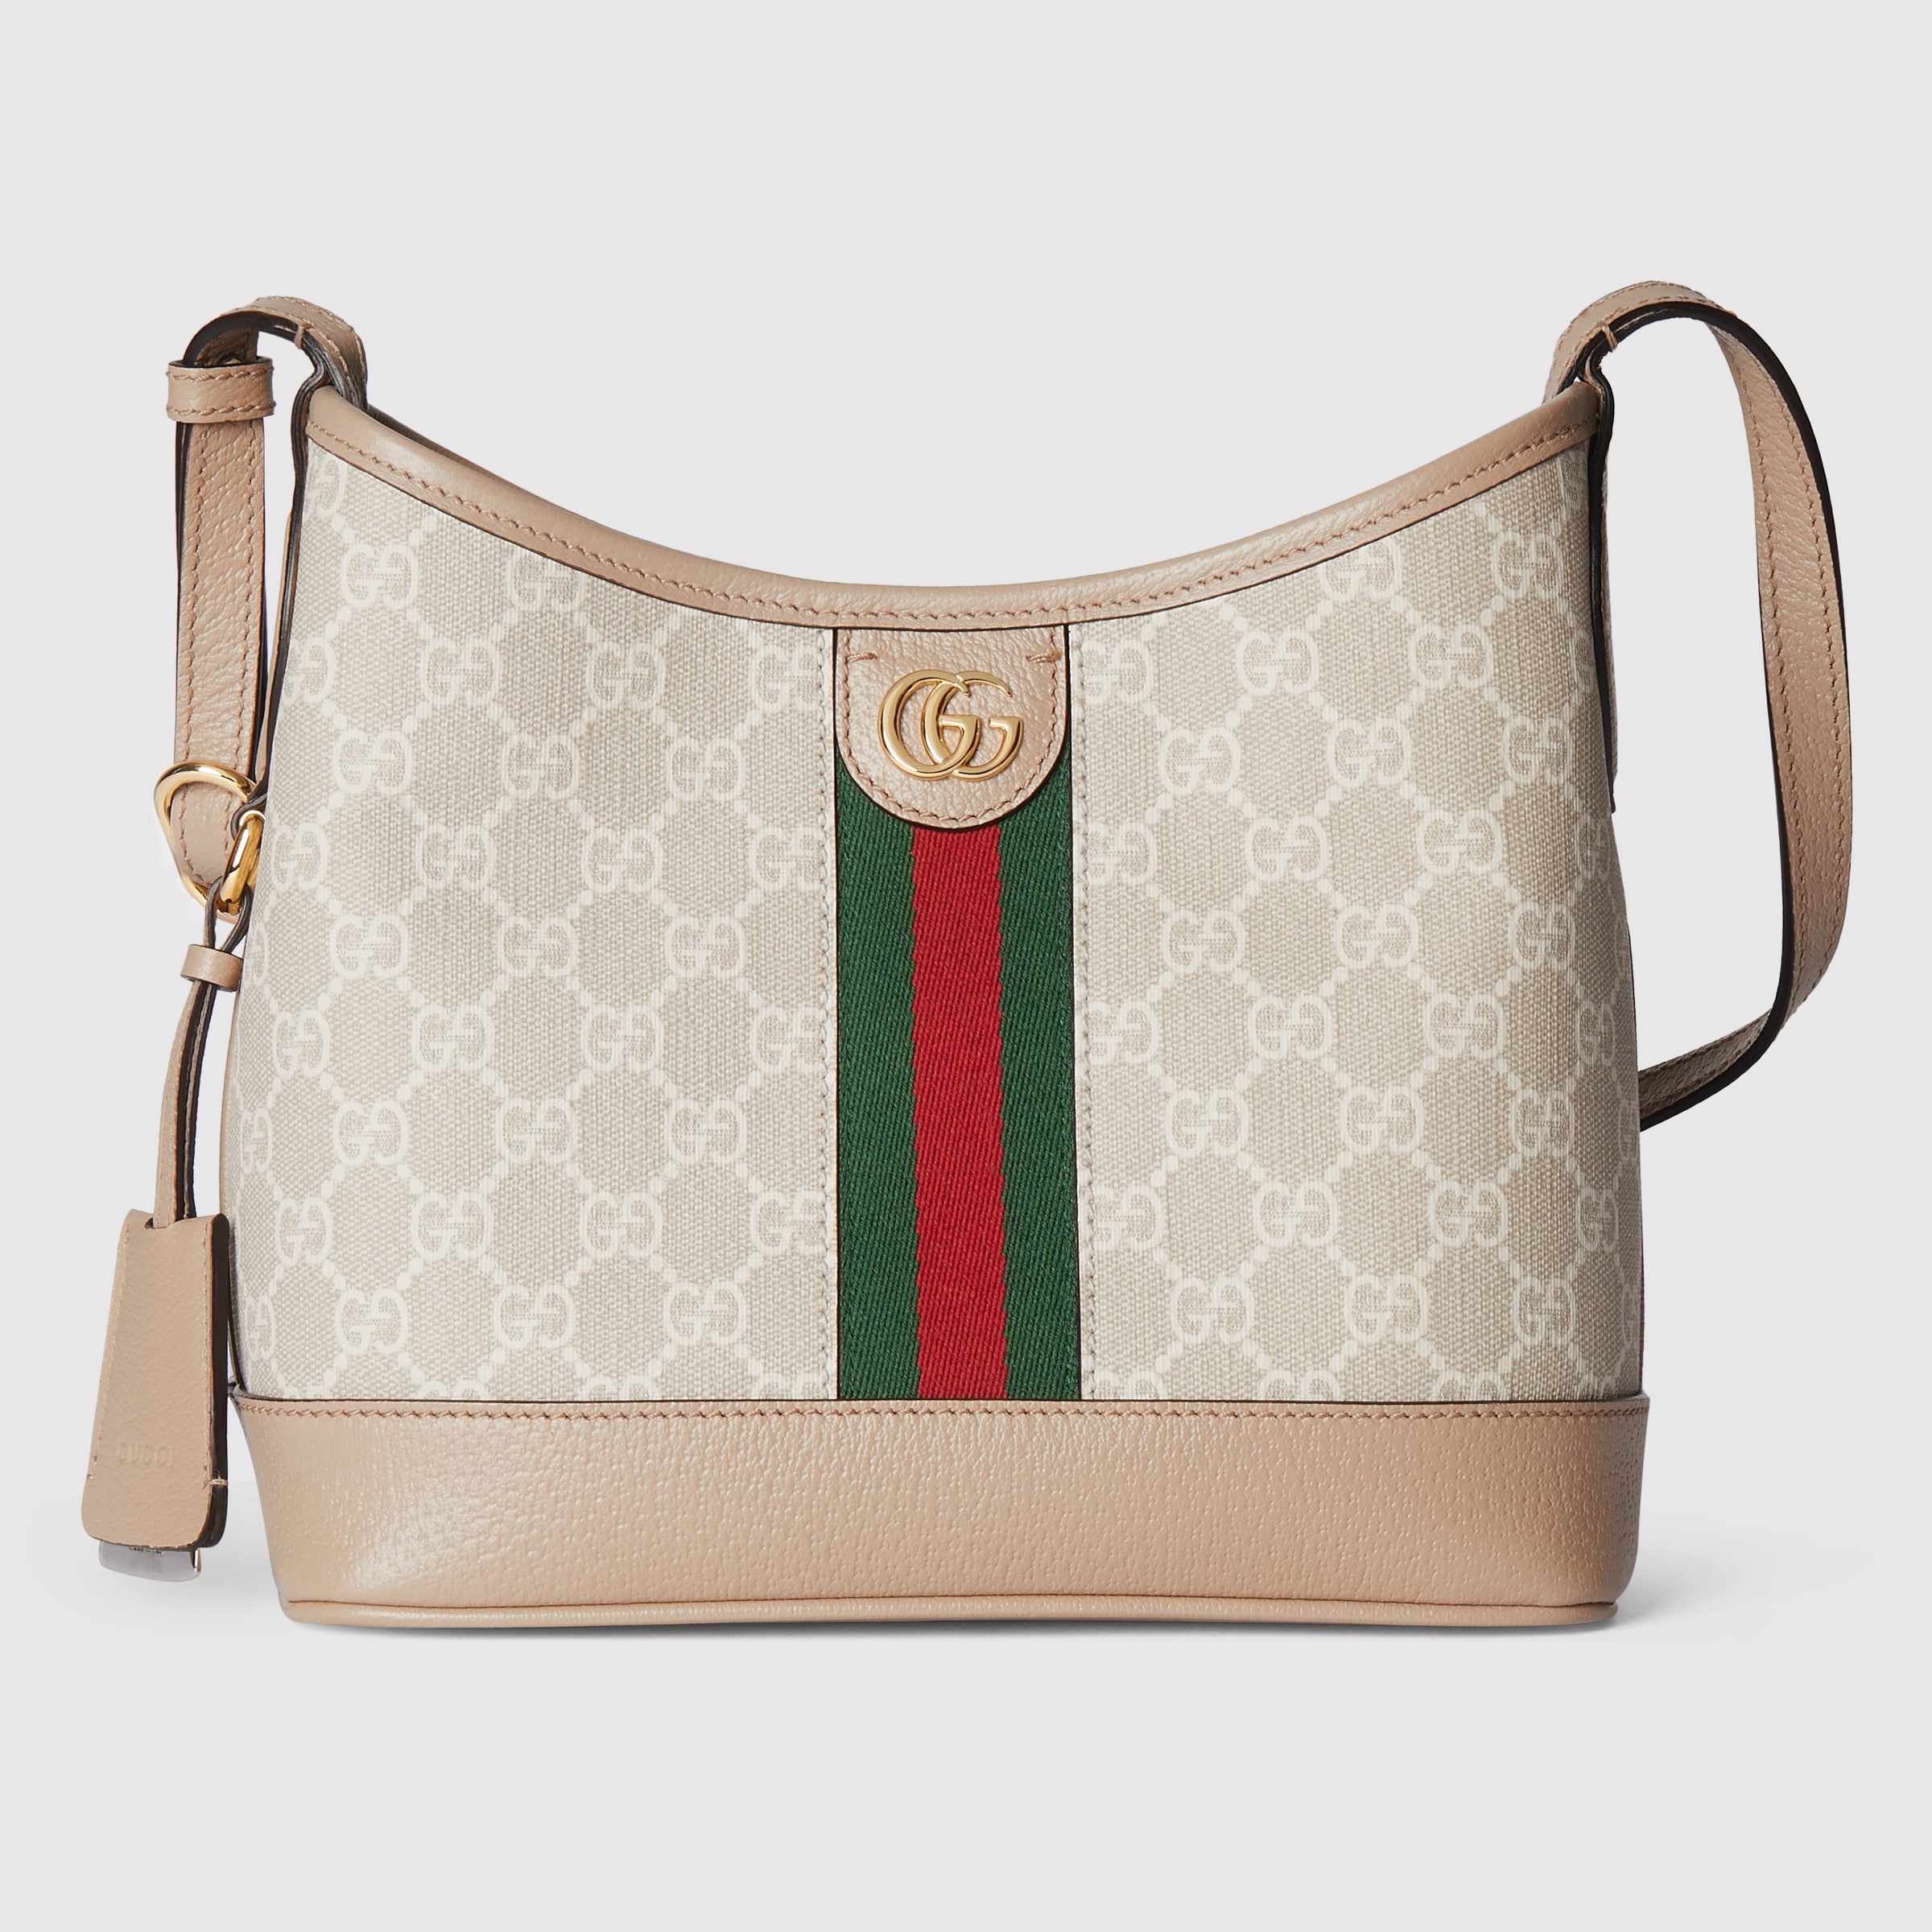 Gucci ophidia gg small shoulder bag